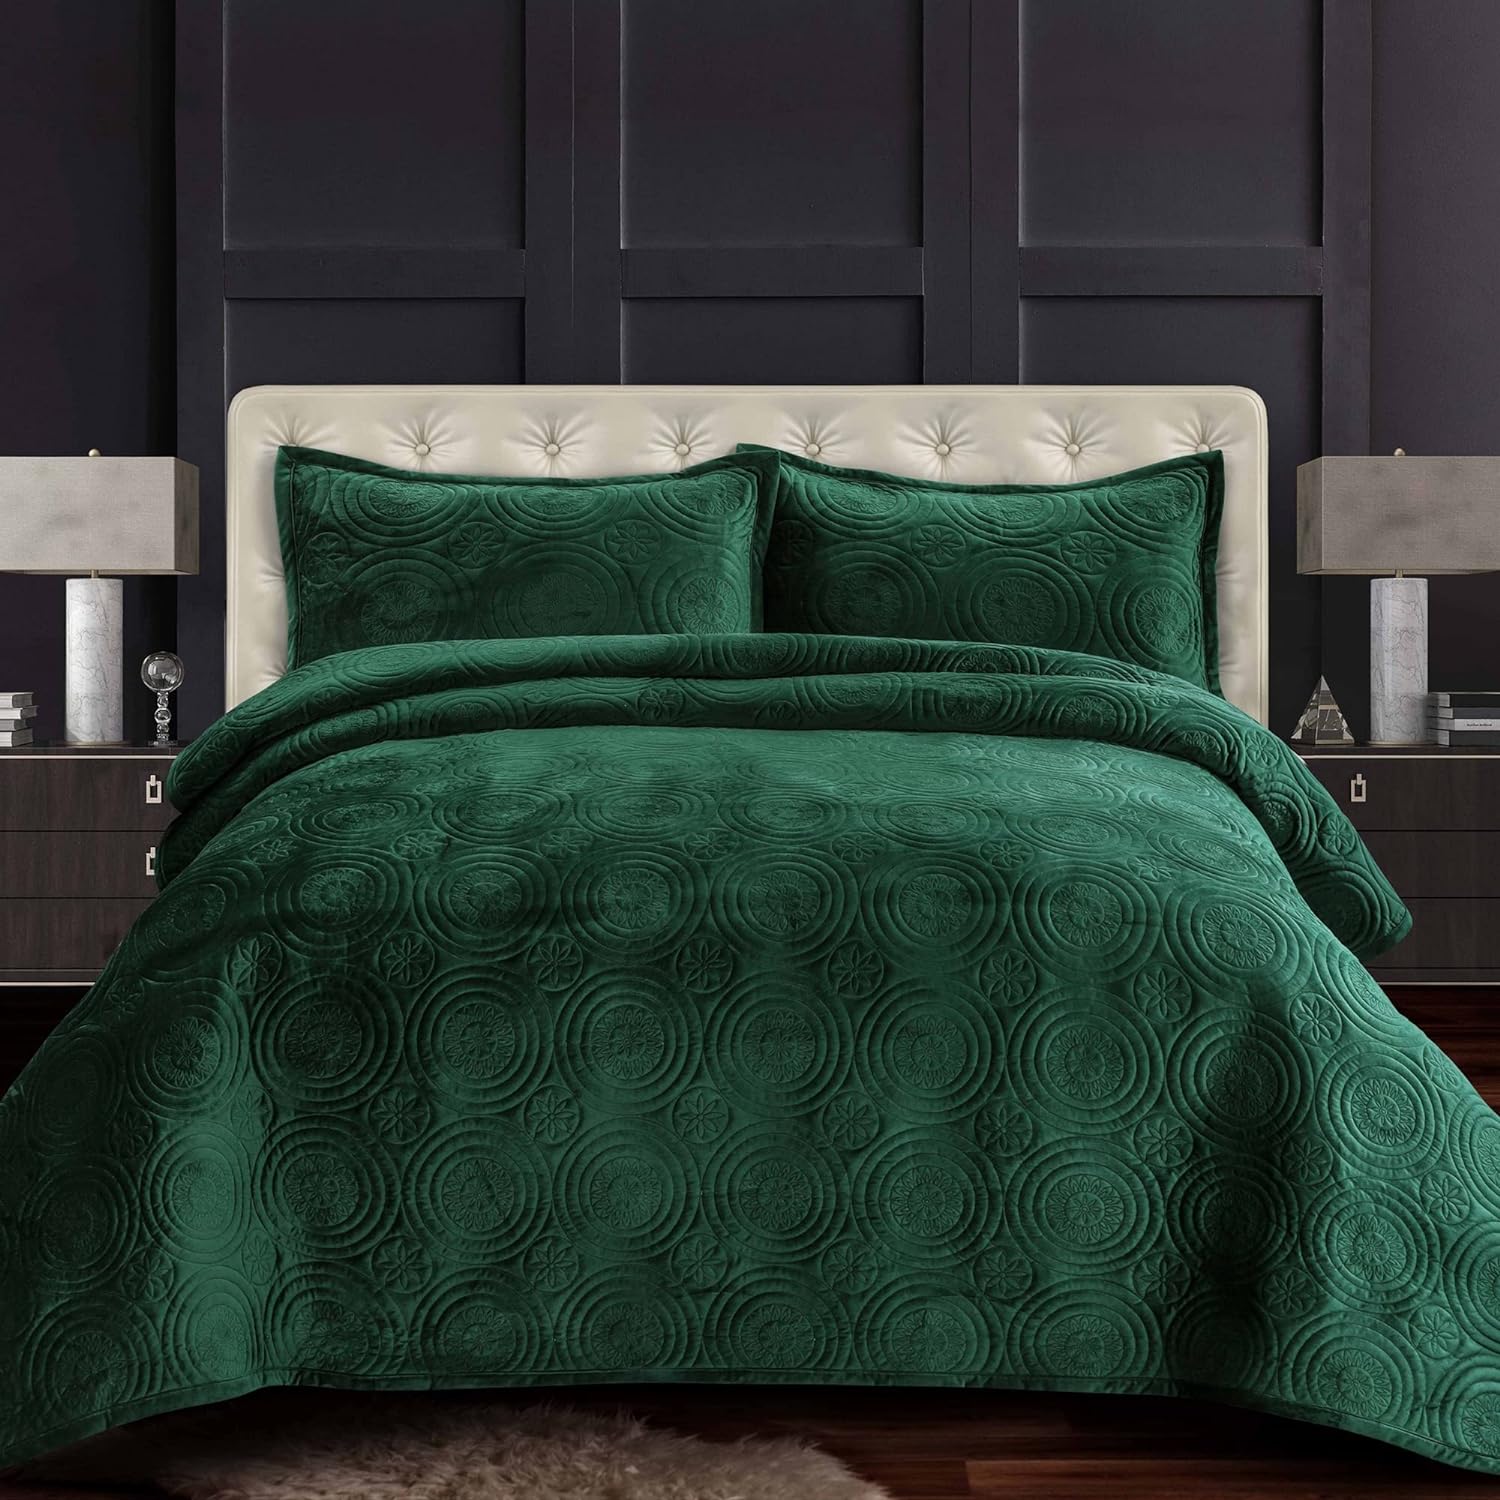 Tribeca Living Oversized Velvet Quilt, Two Piece Twin Bed Set, 260GSM Soft Velvet Quilted Set Includes One Quilt & One Sham Pillowcase, Capri, Teal